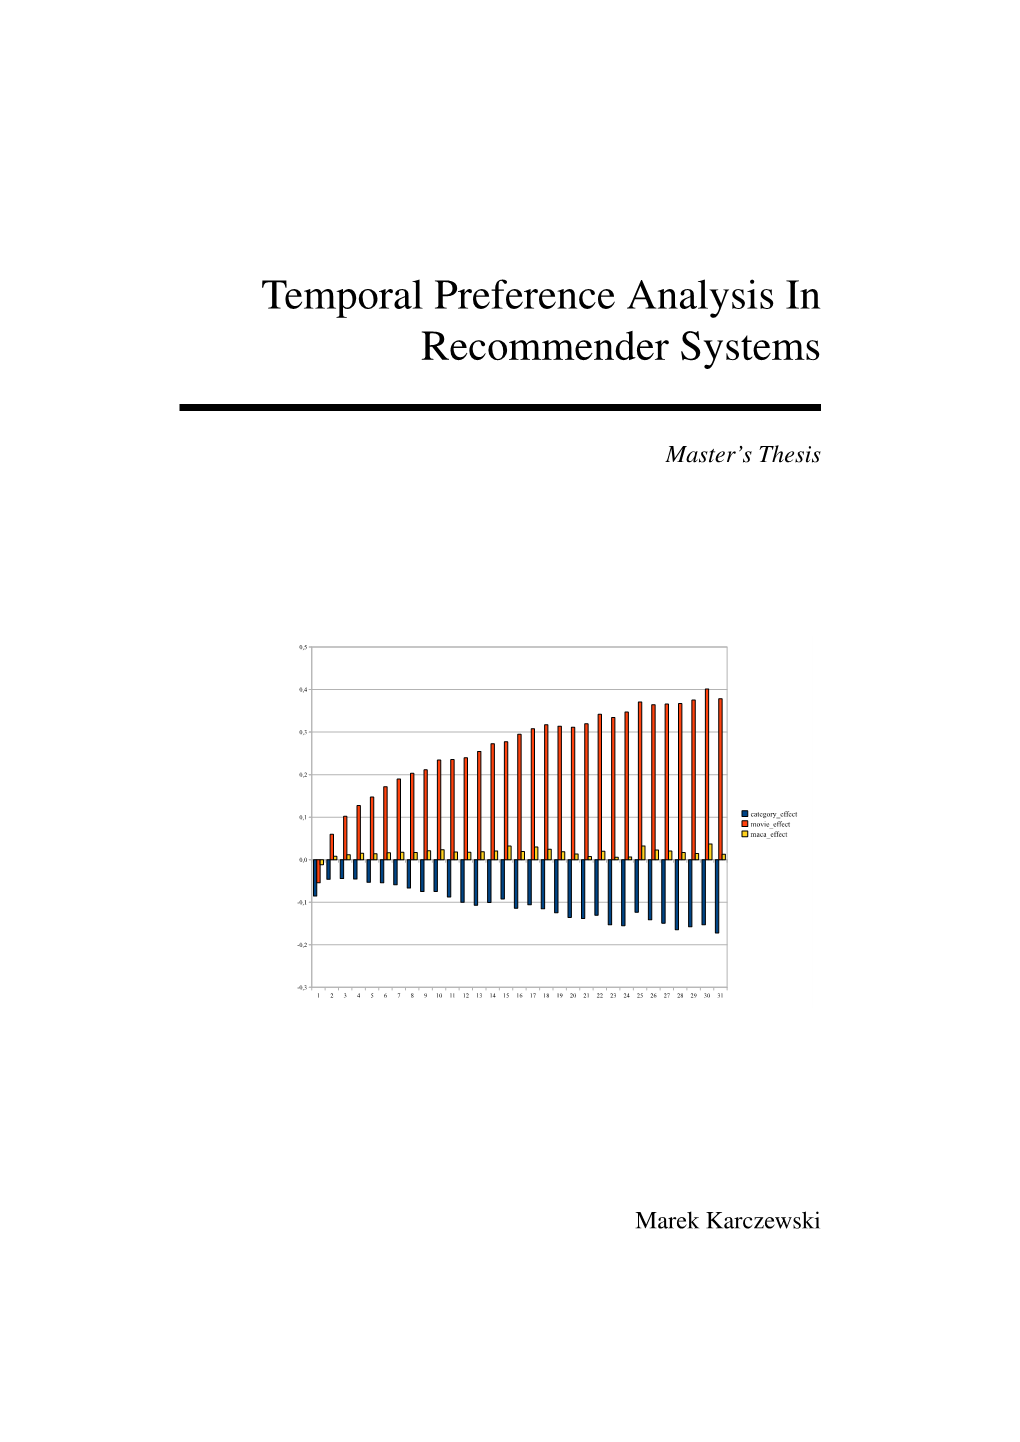 Temporal Preference Analysis in Recommender Systems